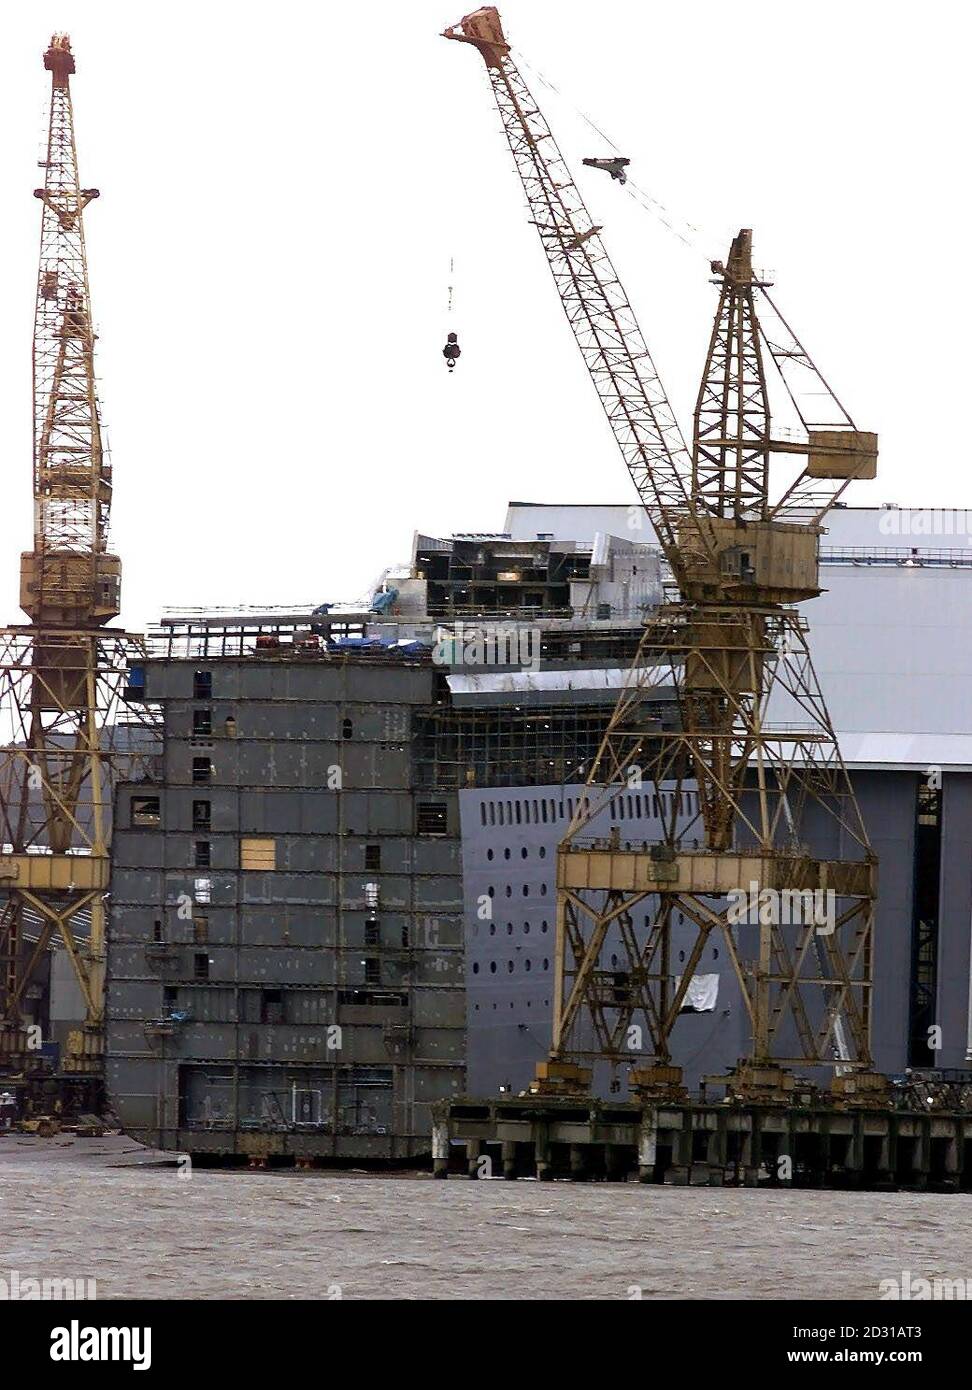 The completed new section for the Italian cruise liner, the Costa Classica, on the slipway at Cammell Laird Ship Builders in Liverpool, after the liner, which was due to arrive for the multi million pound upgrade, was dramatically ordered to turn back due to bad weather. * Cammell Laird said it intended to launch the new mid-body section as planned, but bad weather on the river forced it to be postponed. Stock Photo